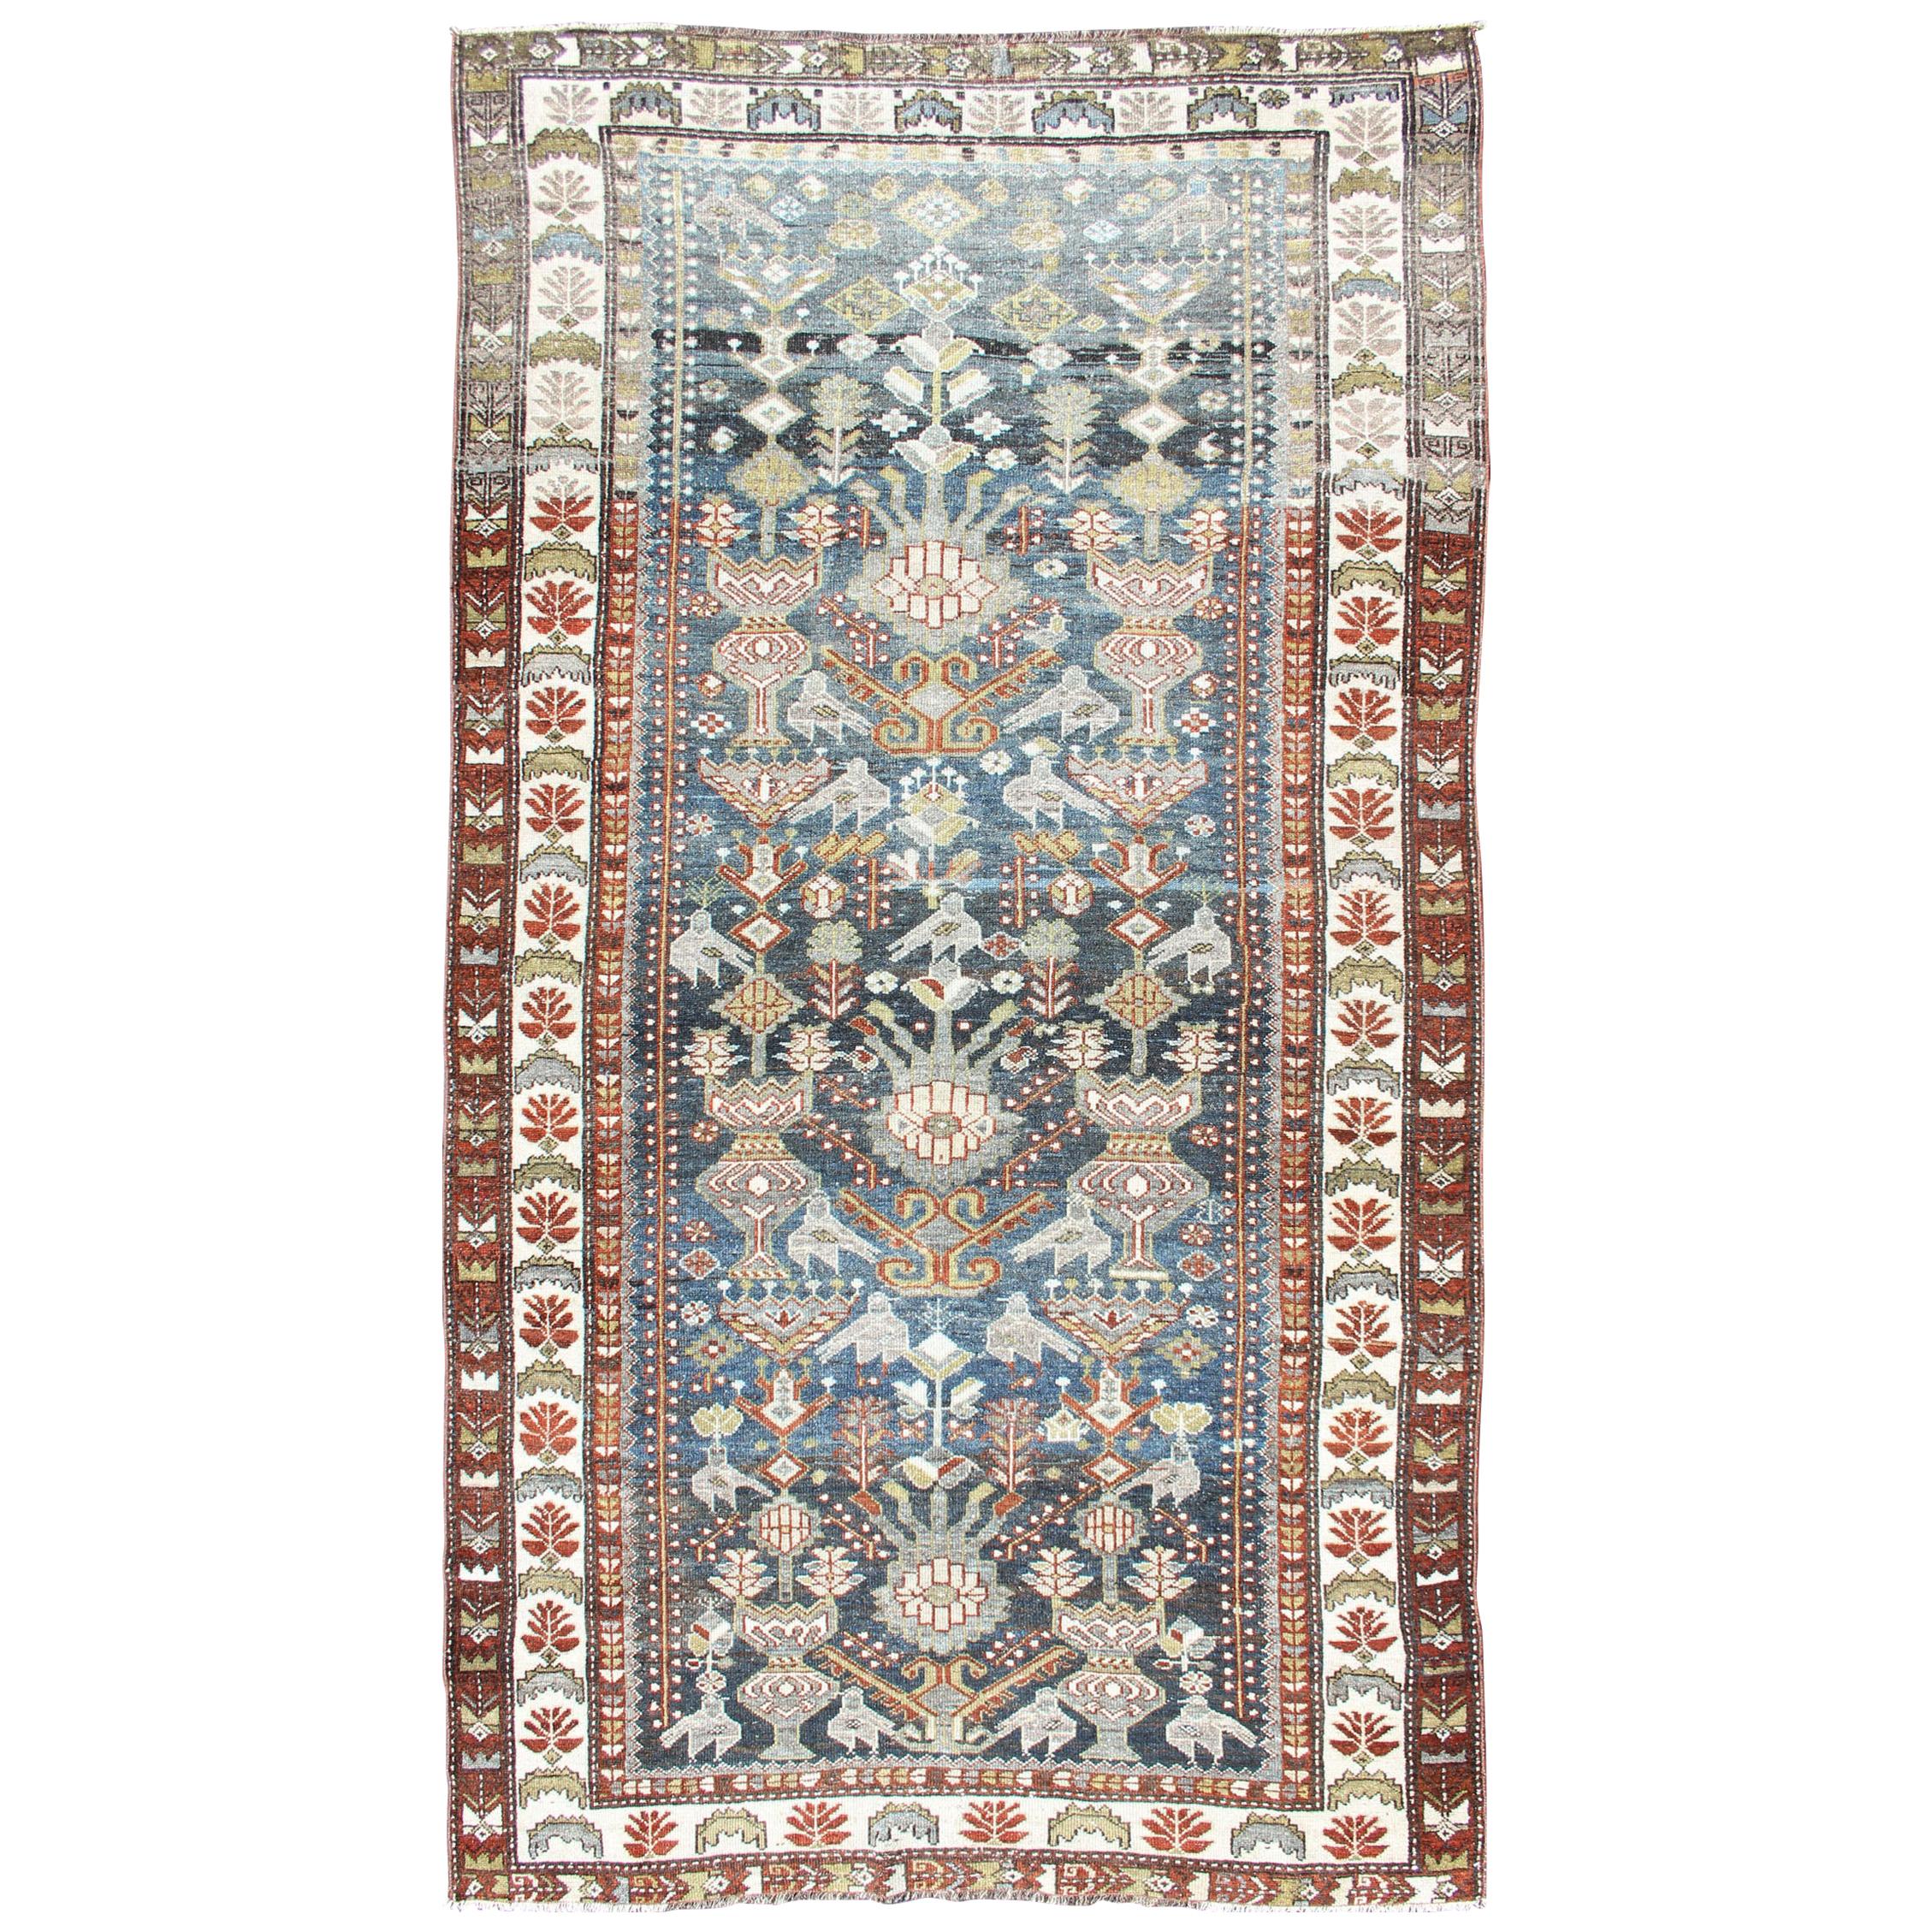  Antique Persian Bakhitari Rug with All-Over Patten in Steel Blue Background For Sale